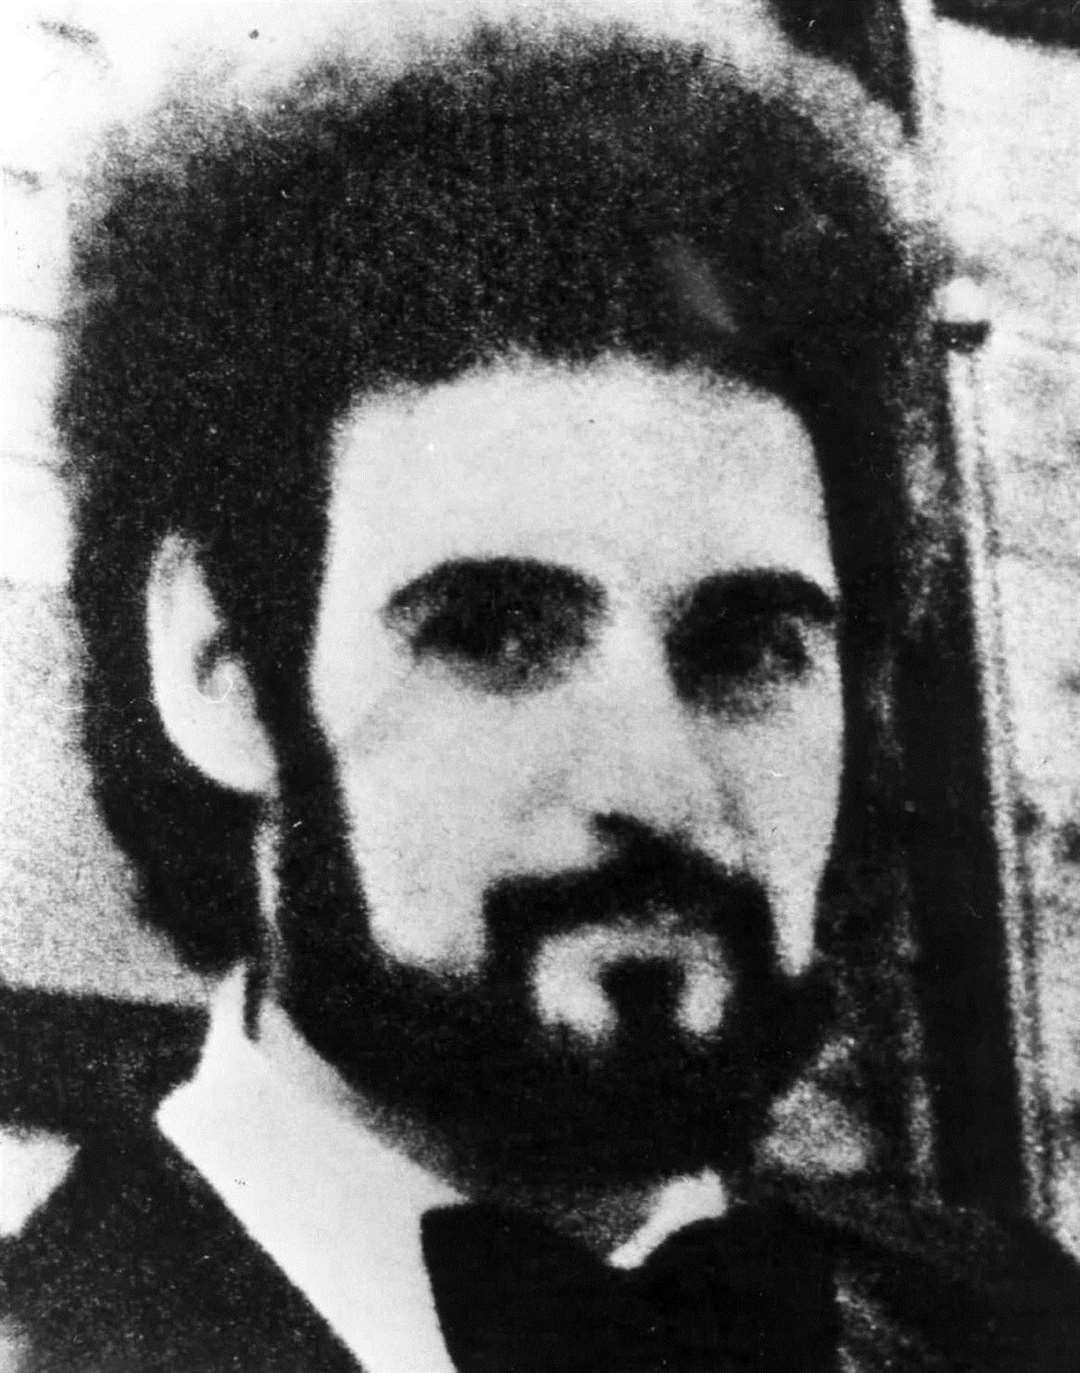 Ben Conlon came face to face with Peter Sutcliffe, the Yorkshire Ripper